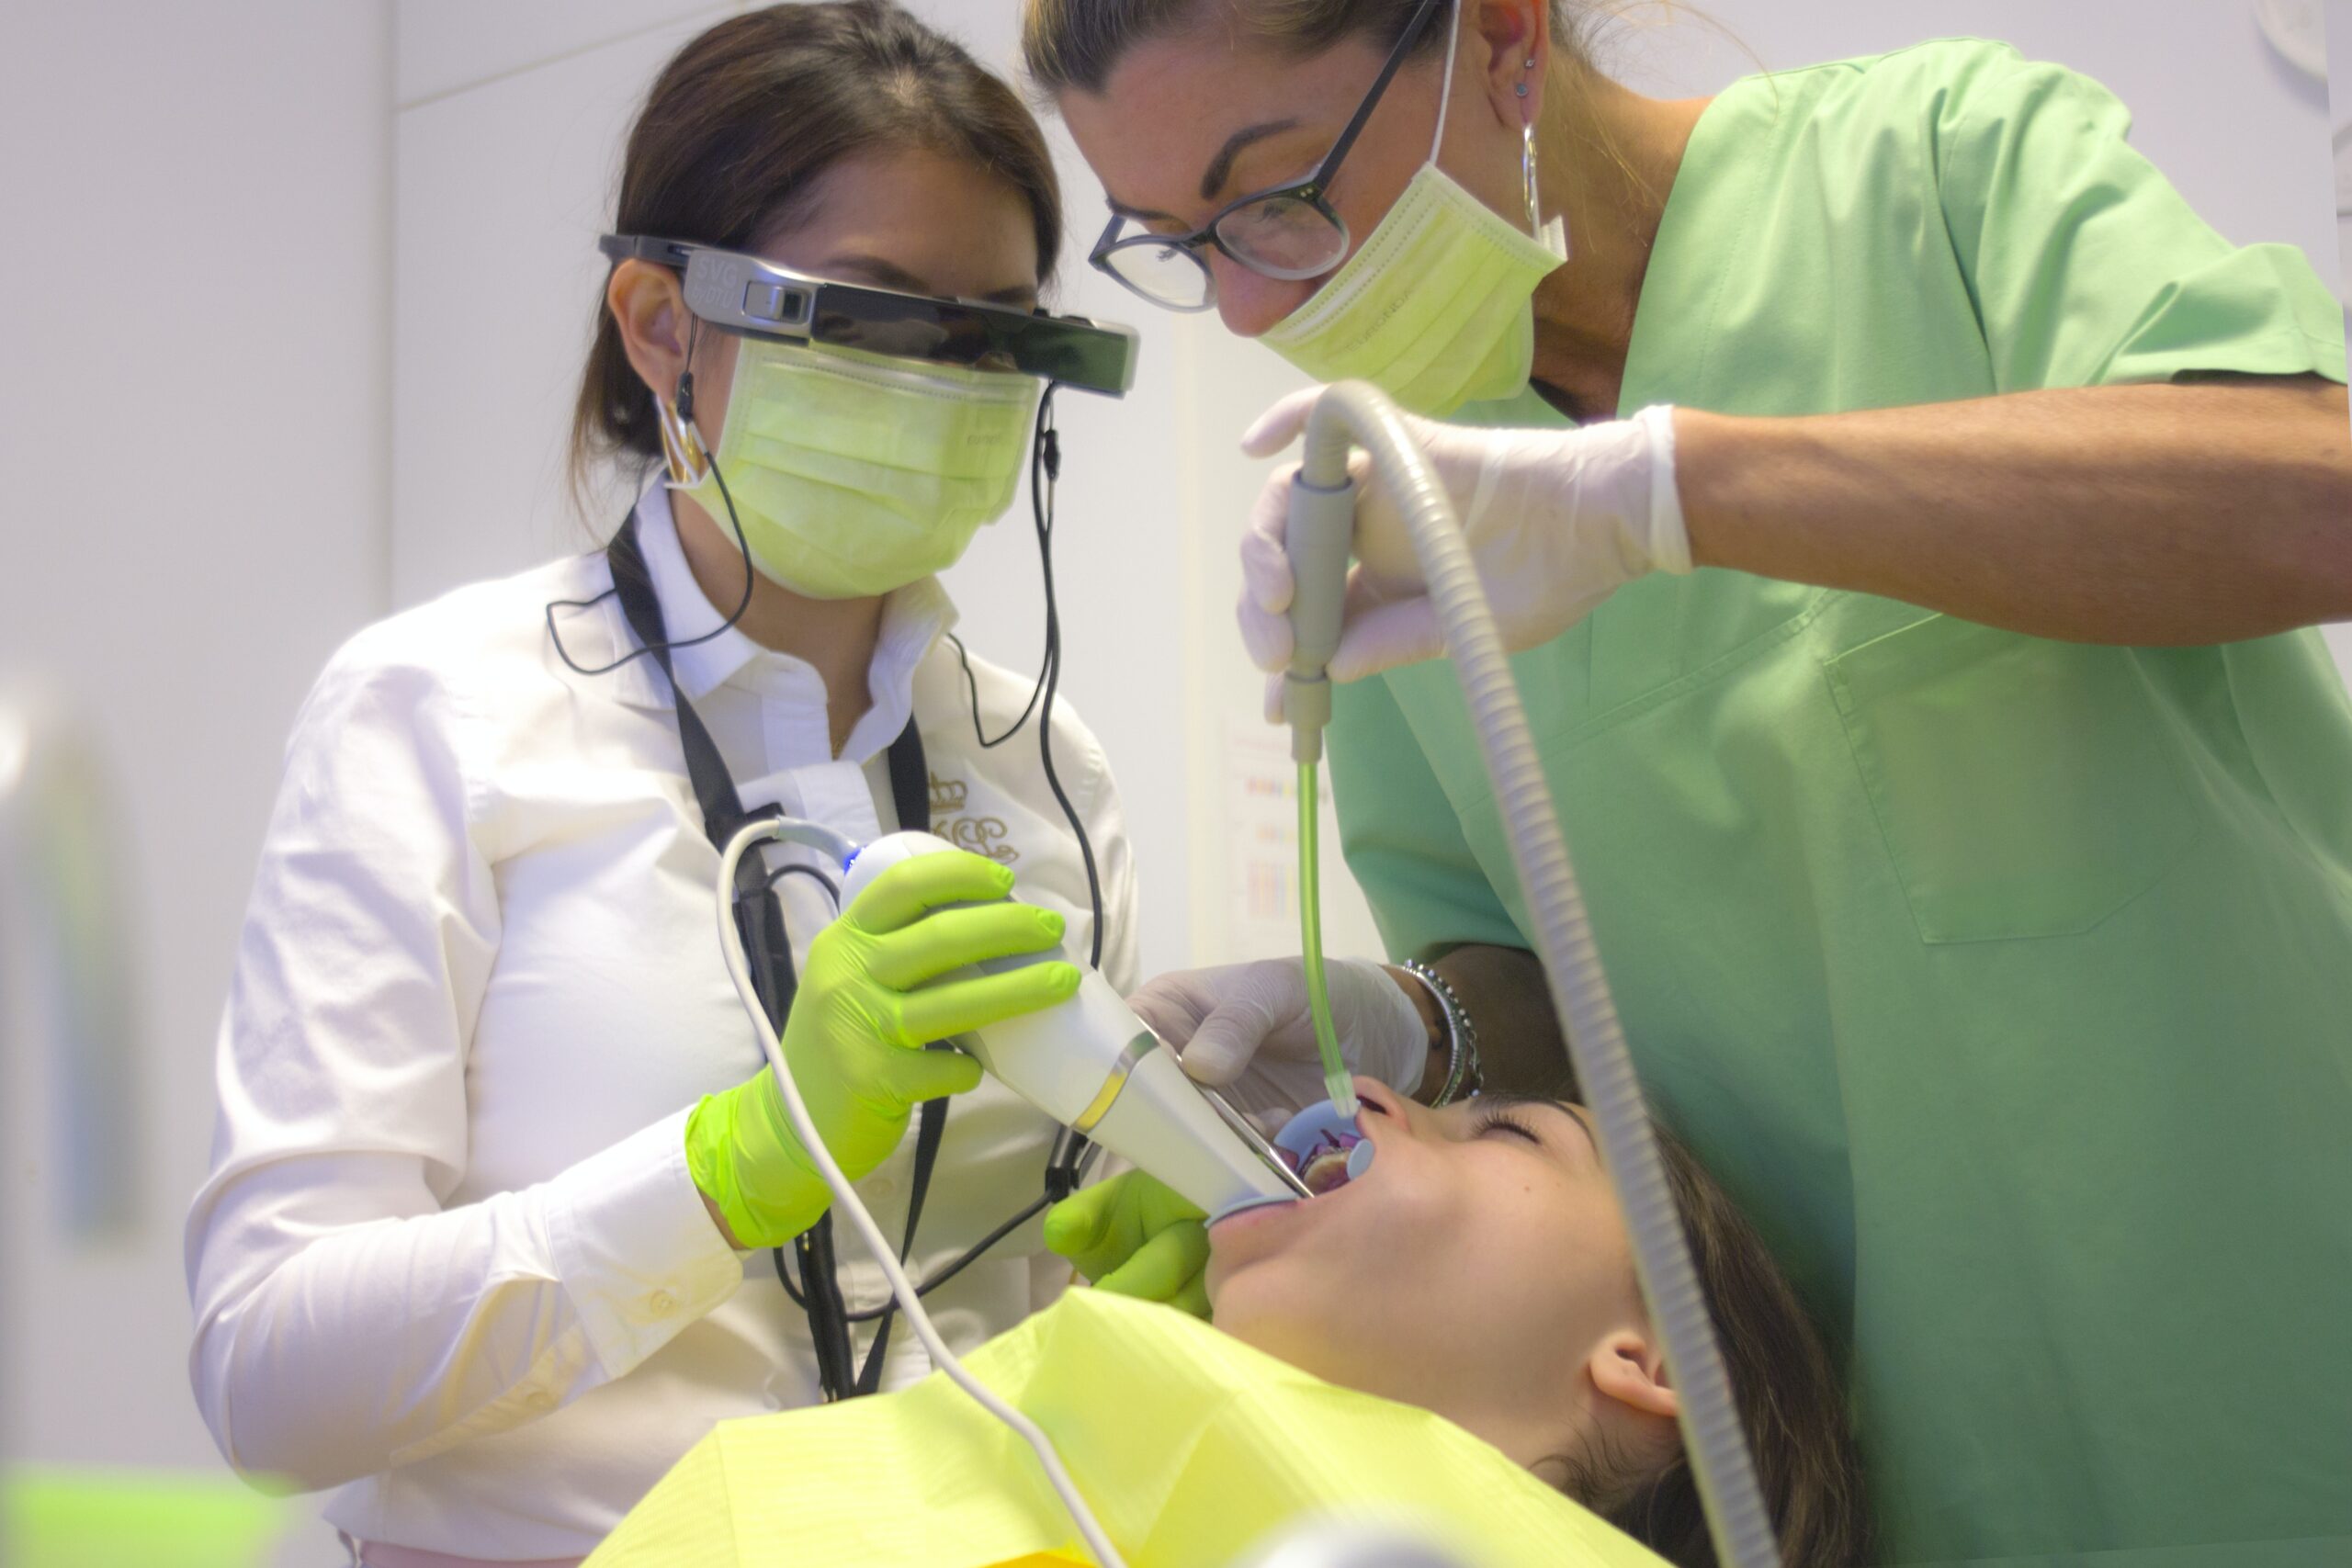 Tooth or consequences: Even during a pandemic, avoiding the dentist can be bad for your oral health